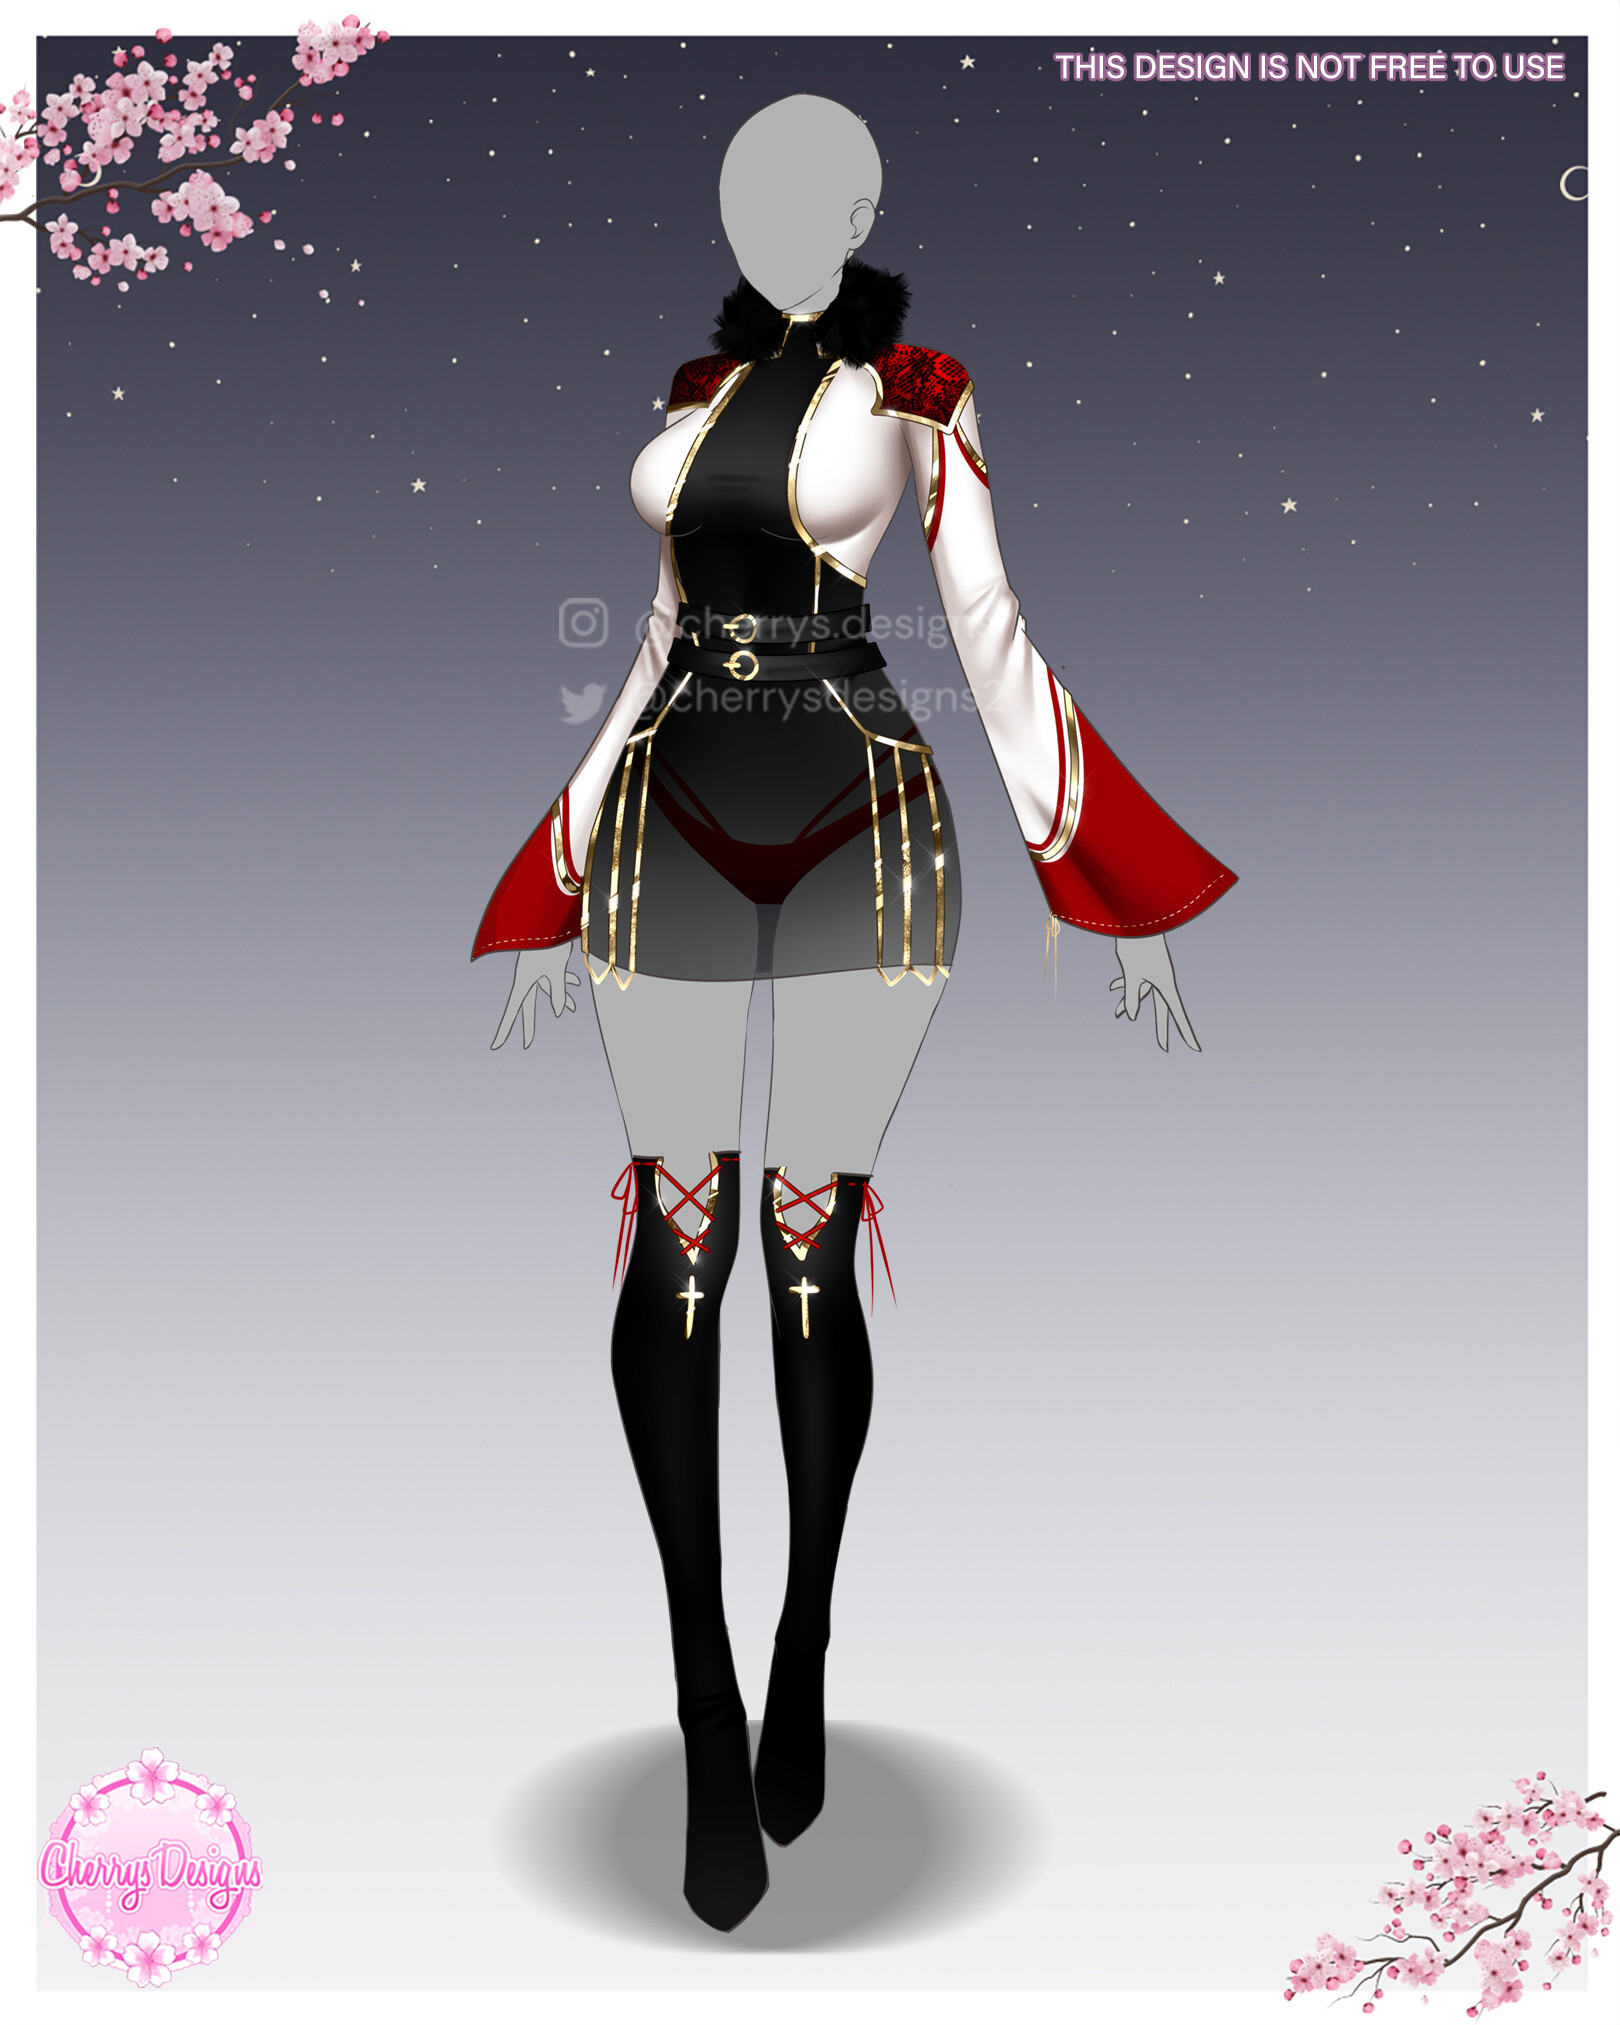 Anime Concept Outfit Design  ArtistsClients